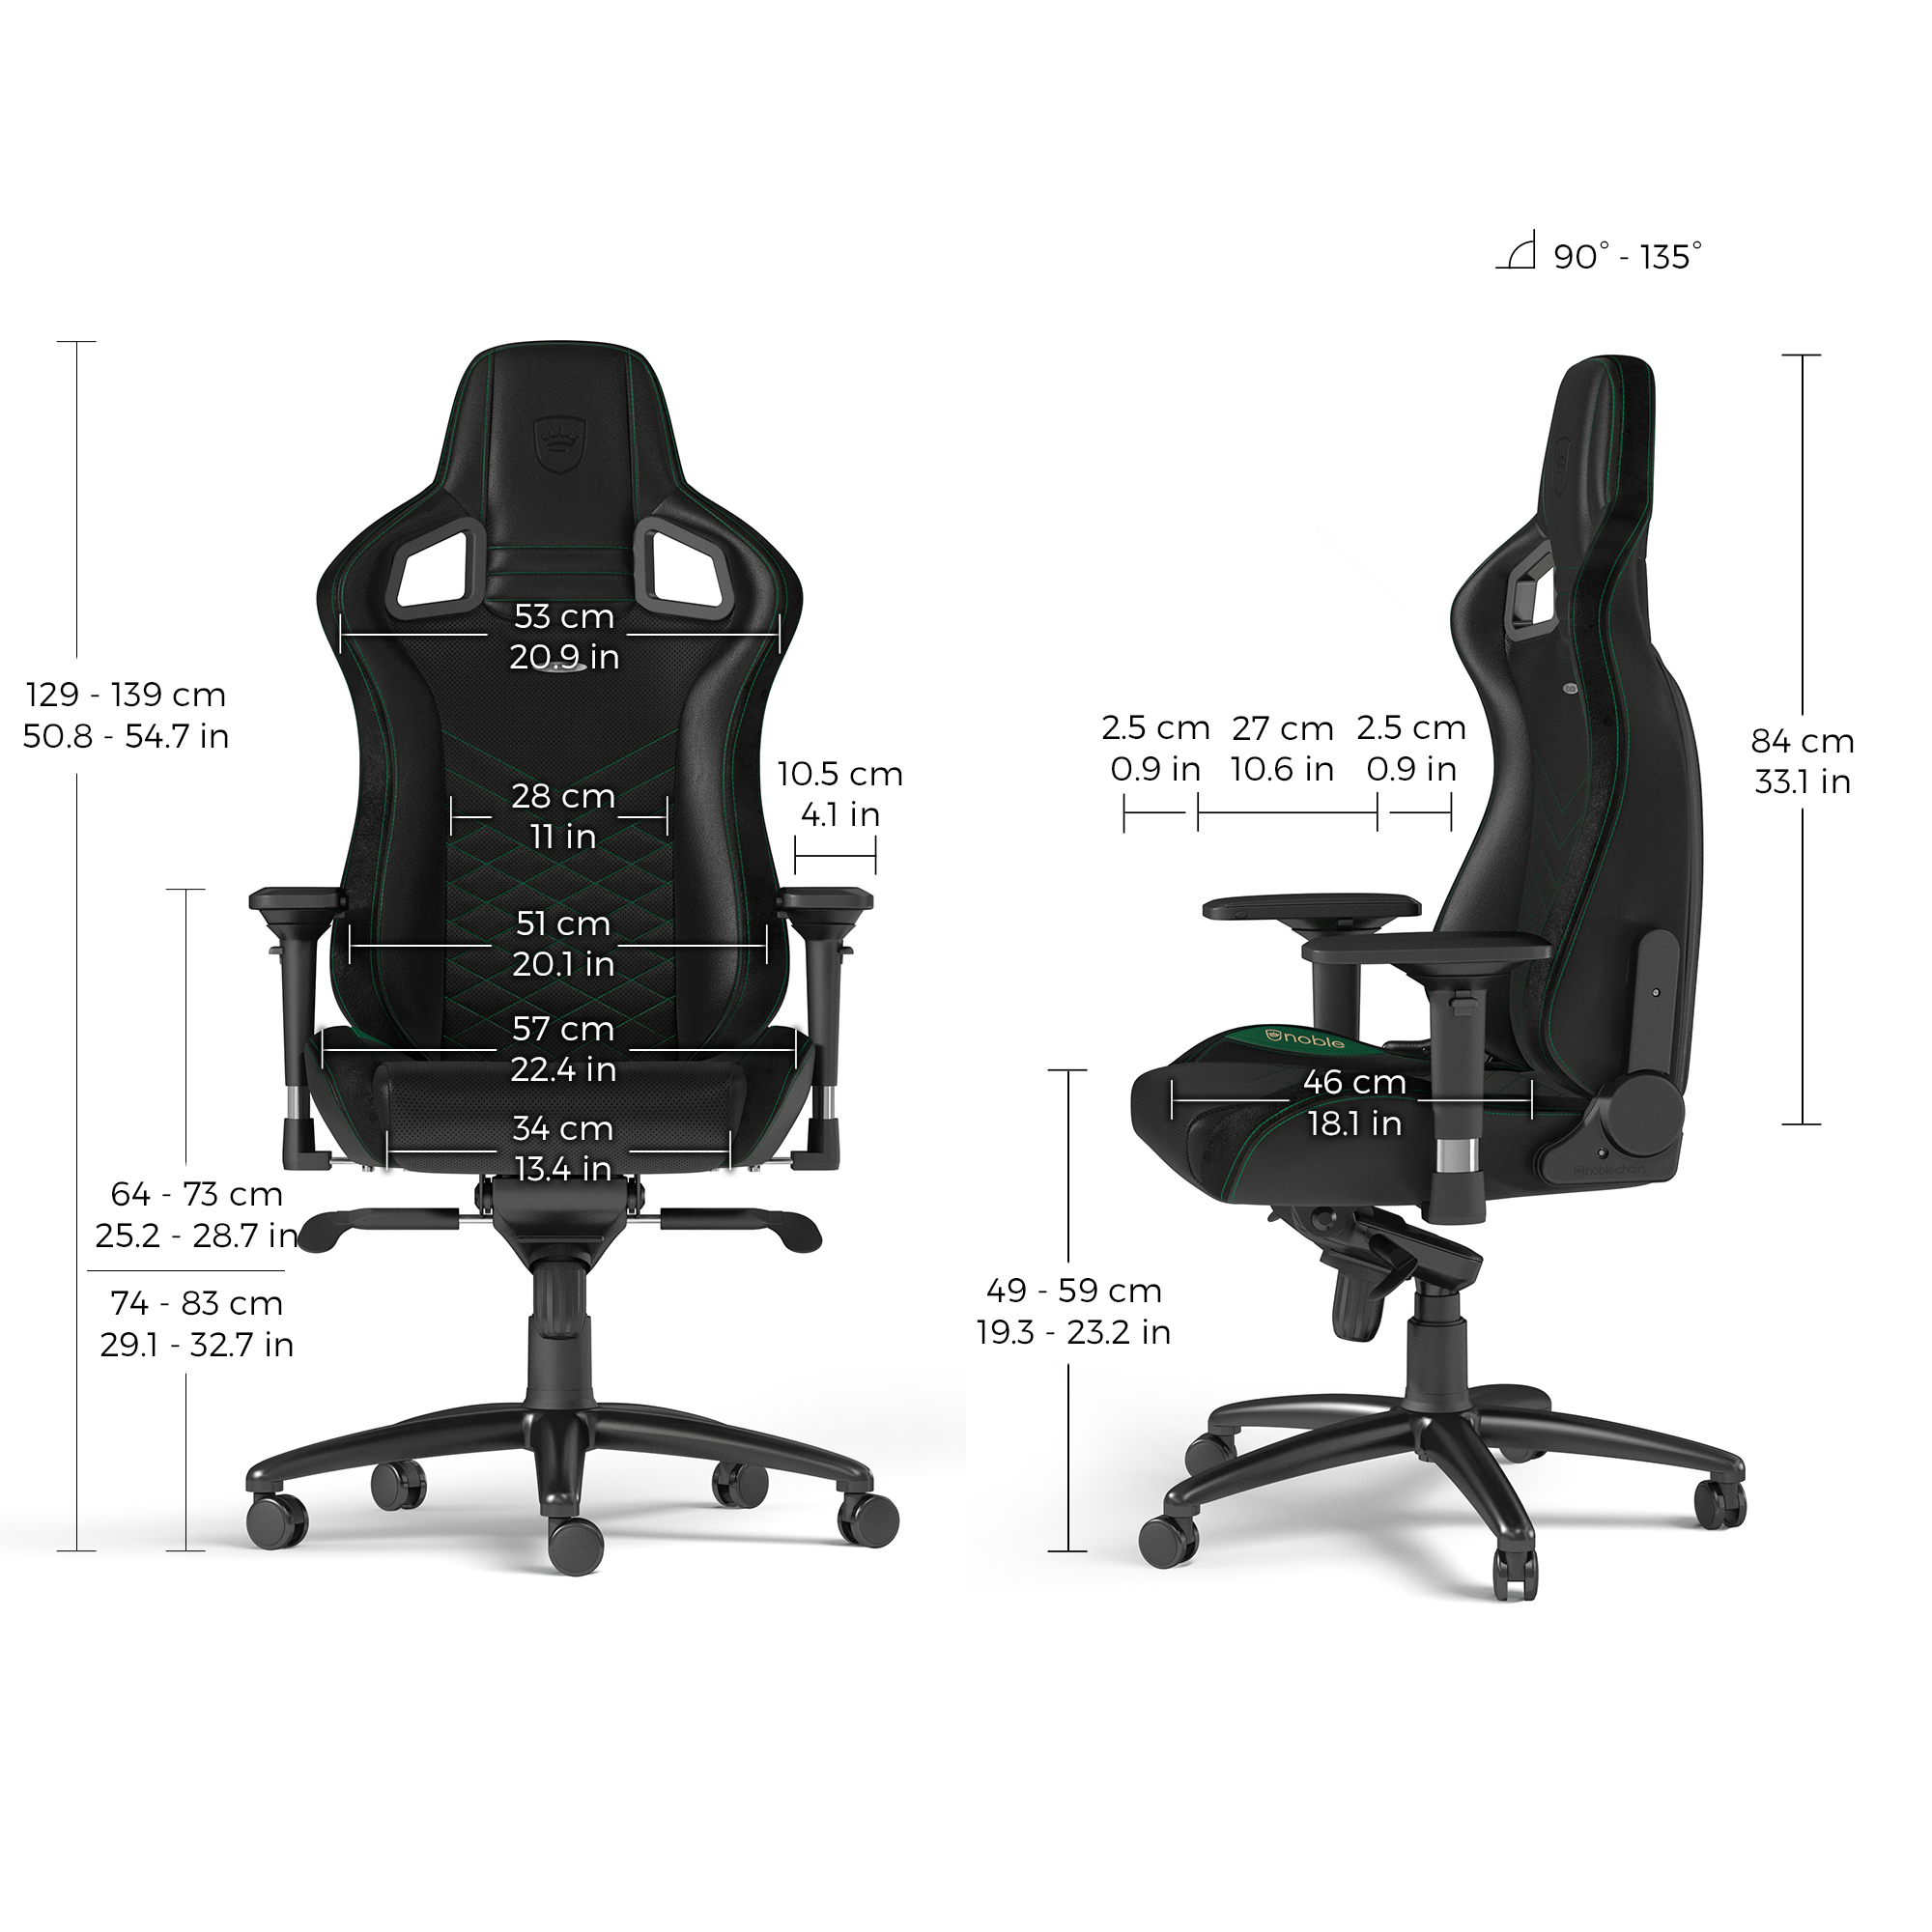 noblechairs - noblechairs EPIC Gaming Chair - Black/Green